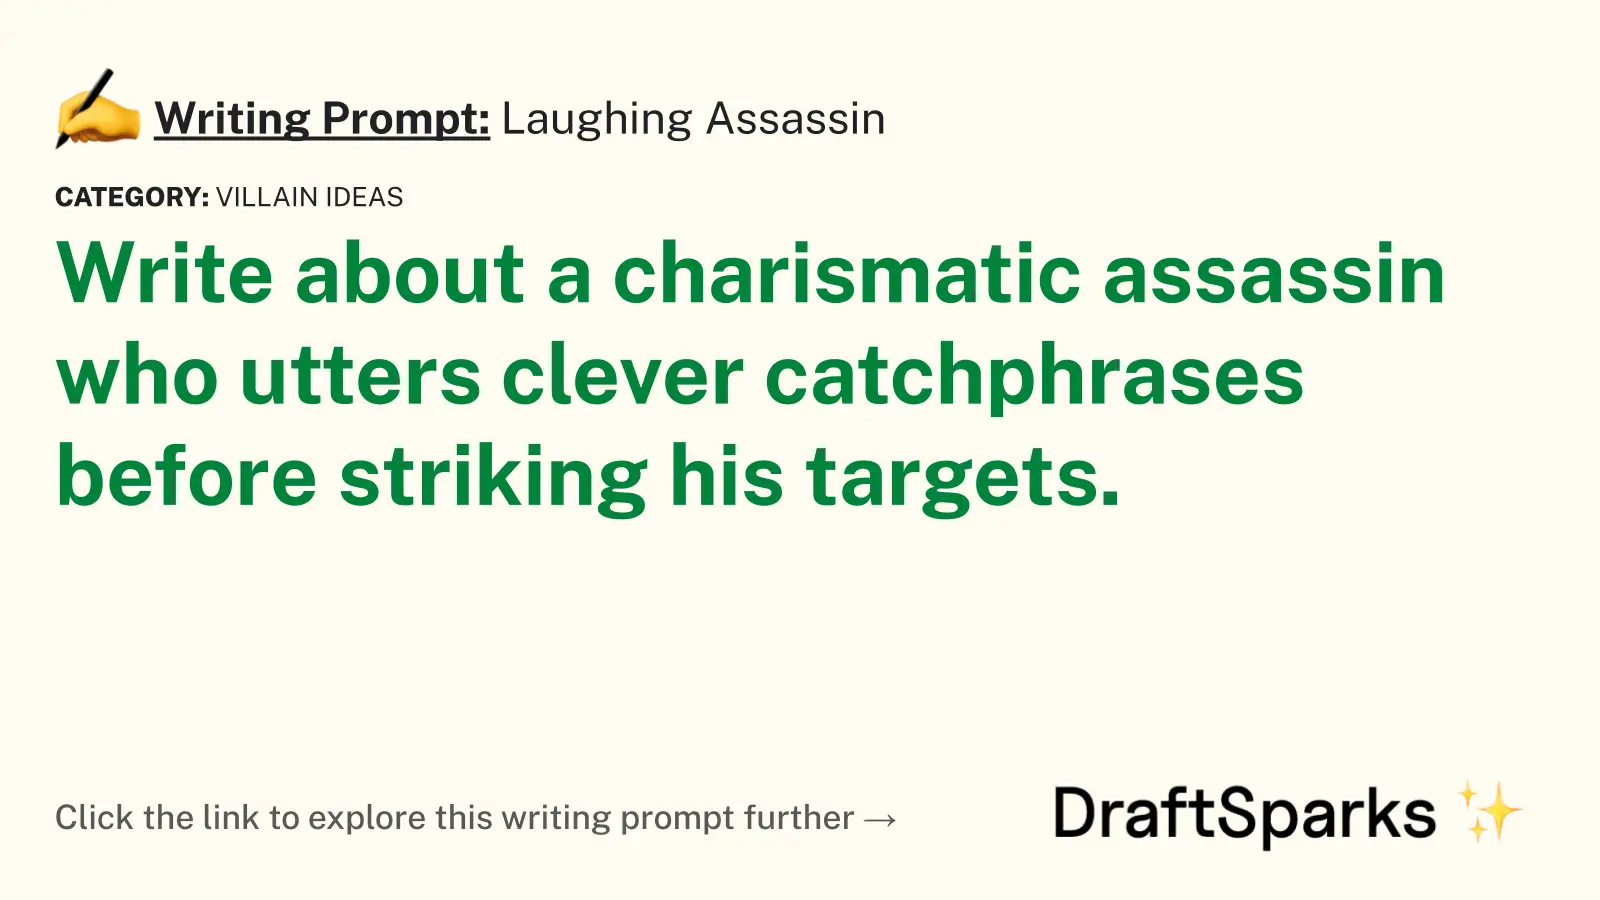 Laughing Assassin